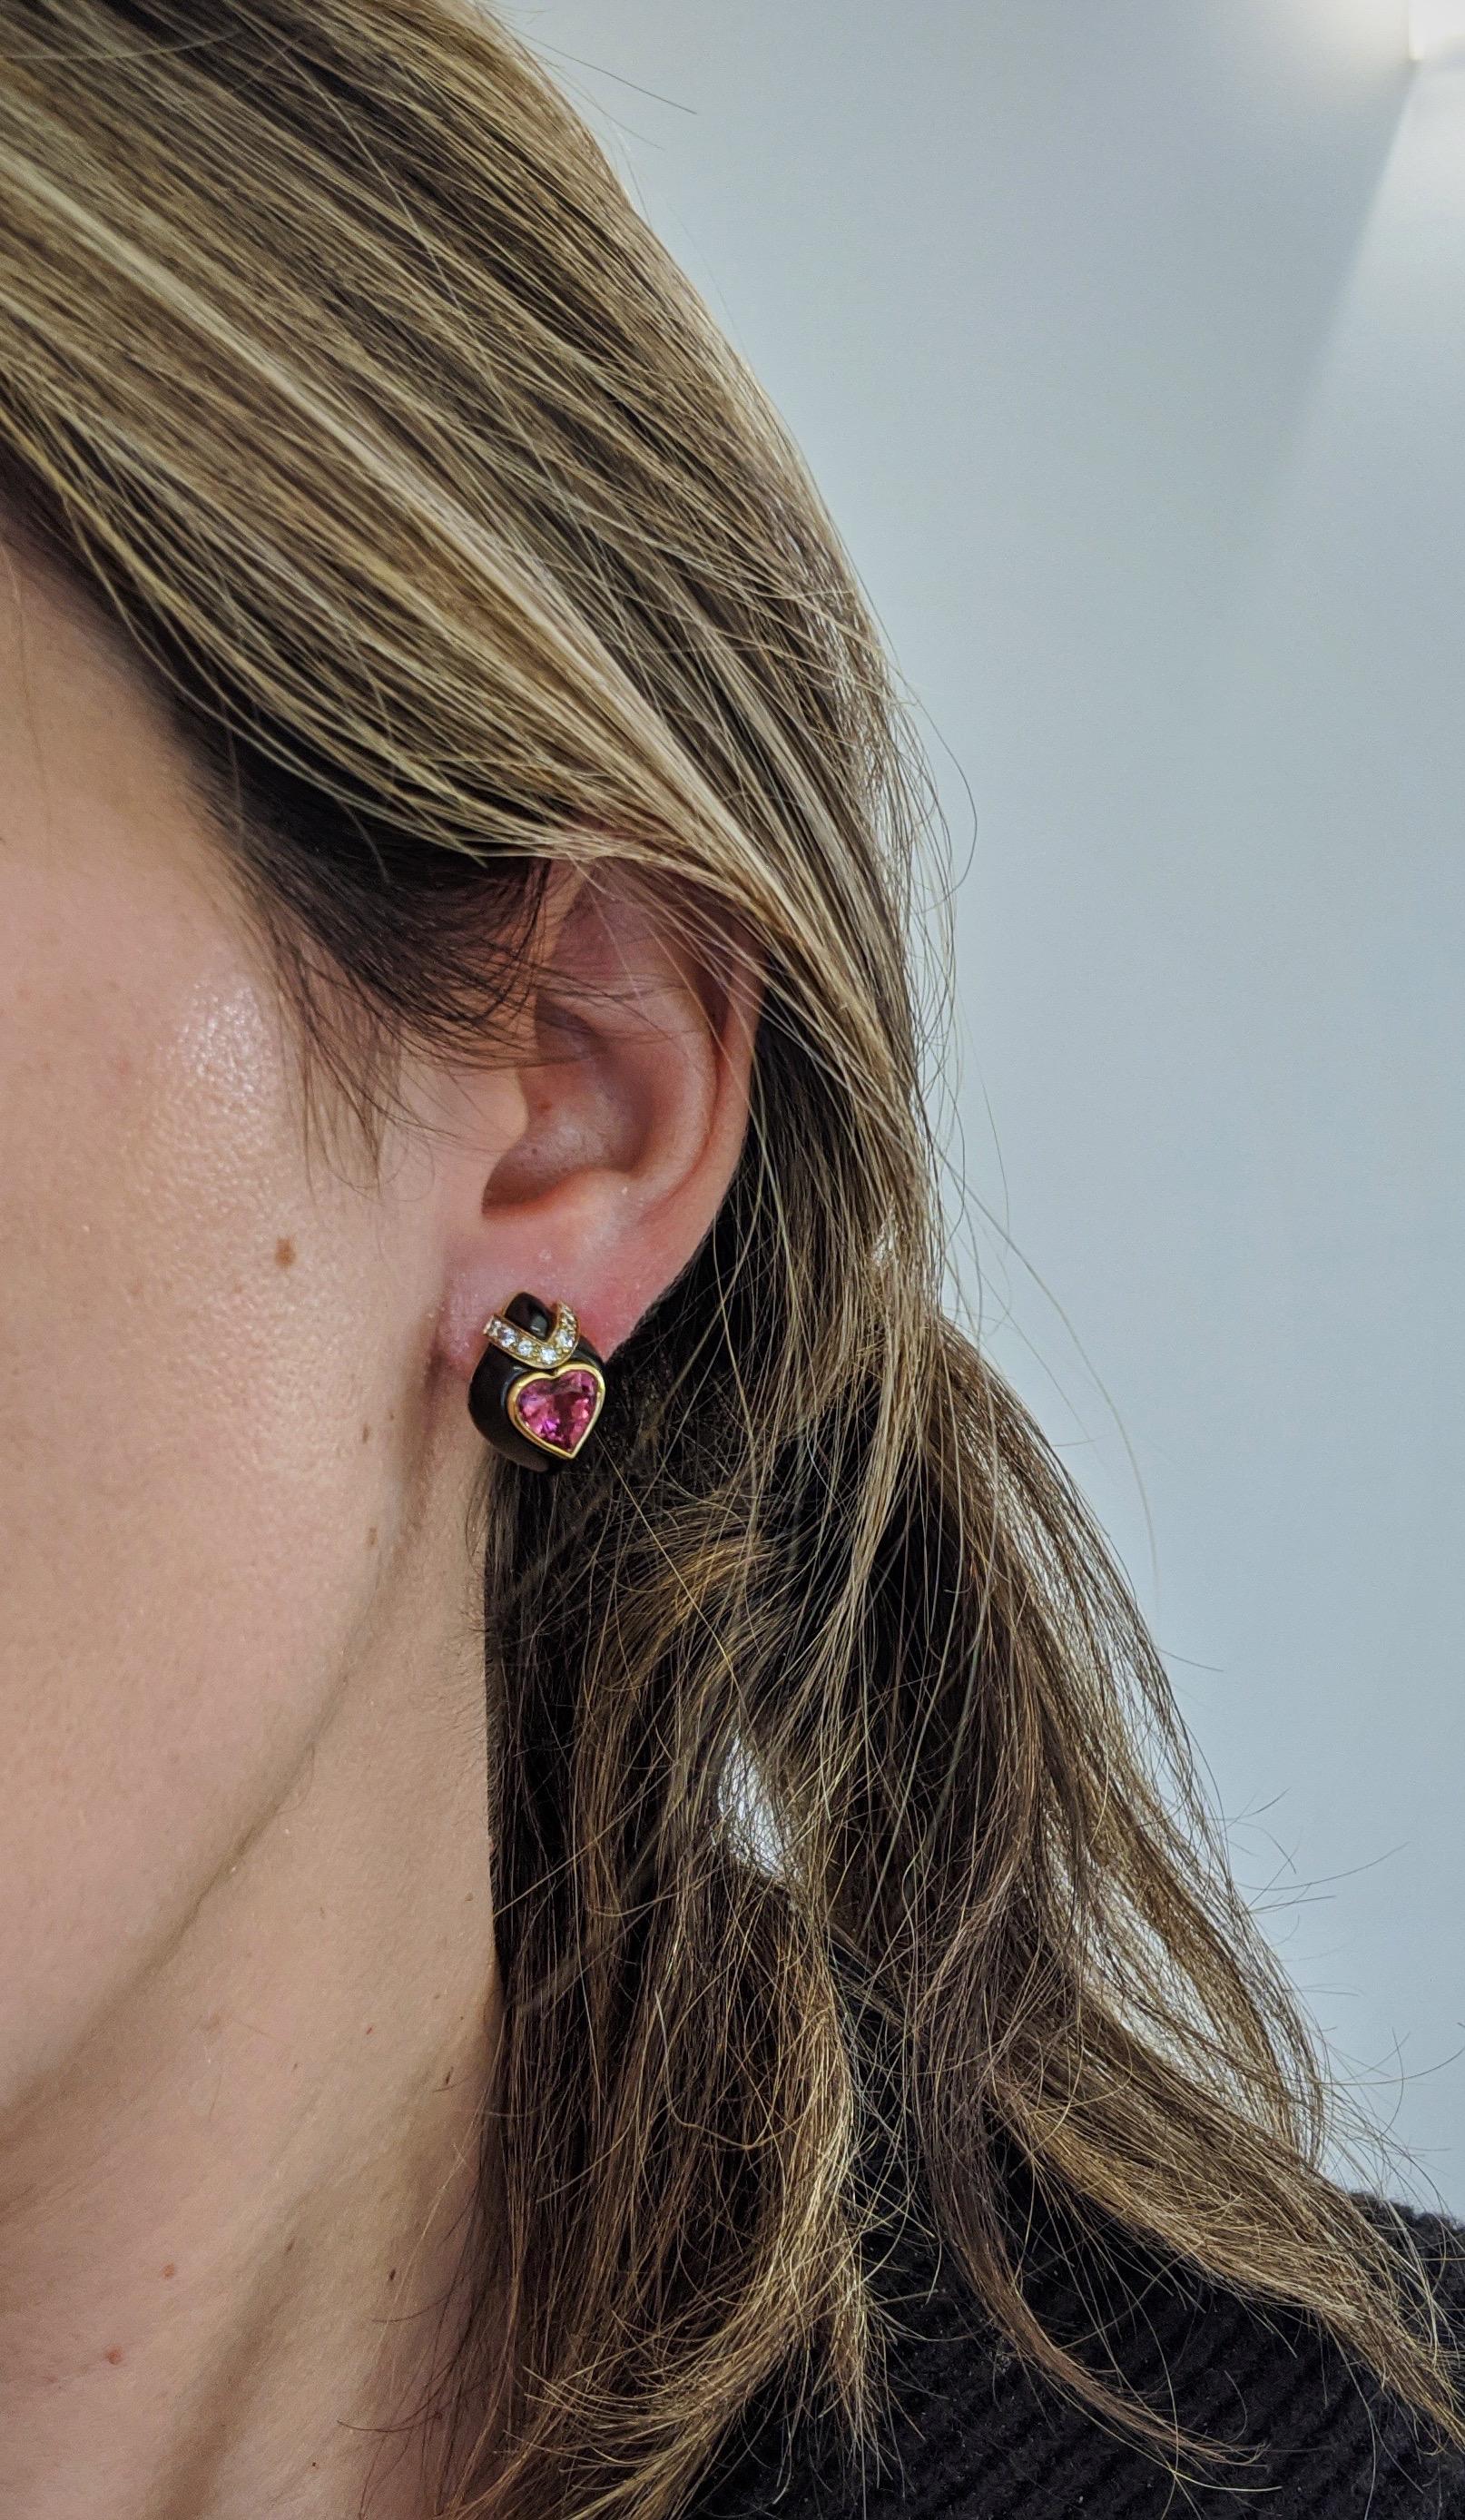 These 18 karat yellow gold teardrop shaped earrings were designed by David Morris.They feature Pink Tourmaline heart centers with a yellow gold bezel setting. The hearts sit on top of an 18 karat blackened gold setting that has been trimmed with